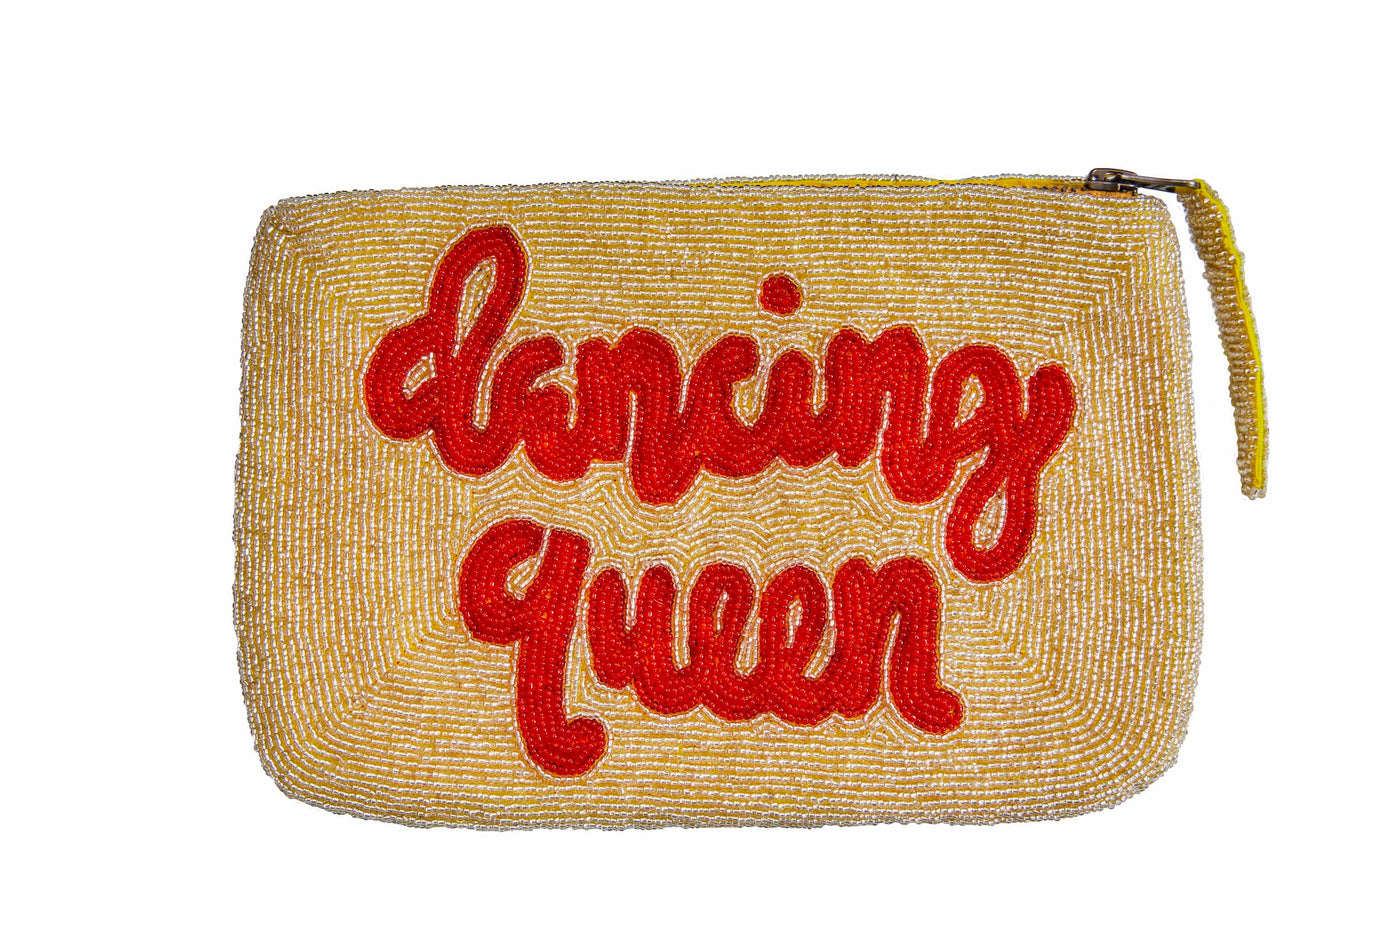 Dancing Queen bead clutch - Gold and red